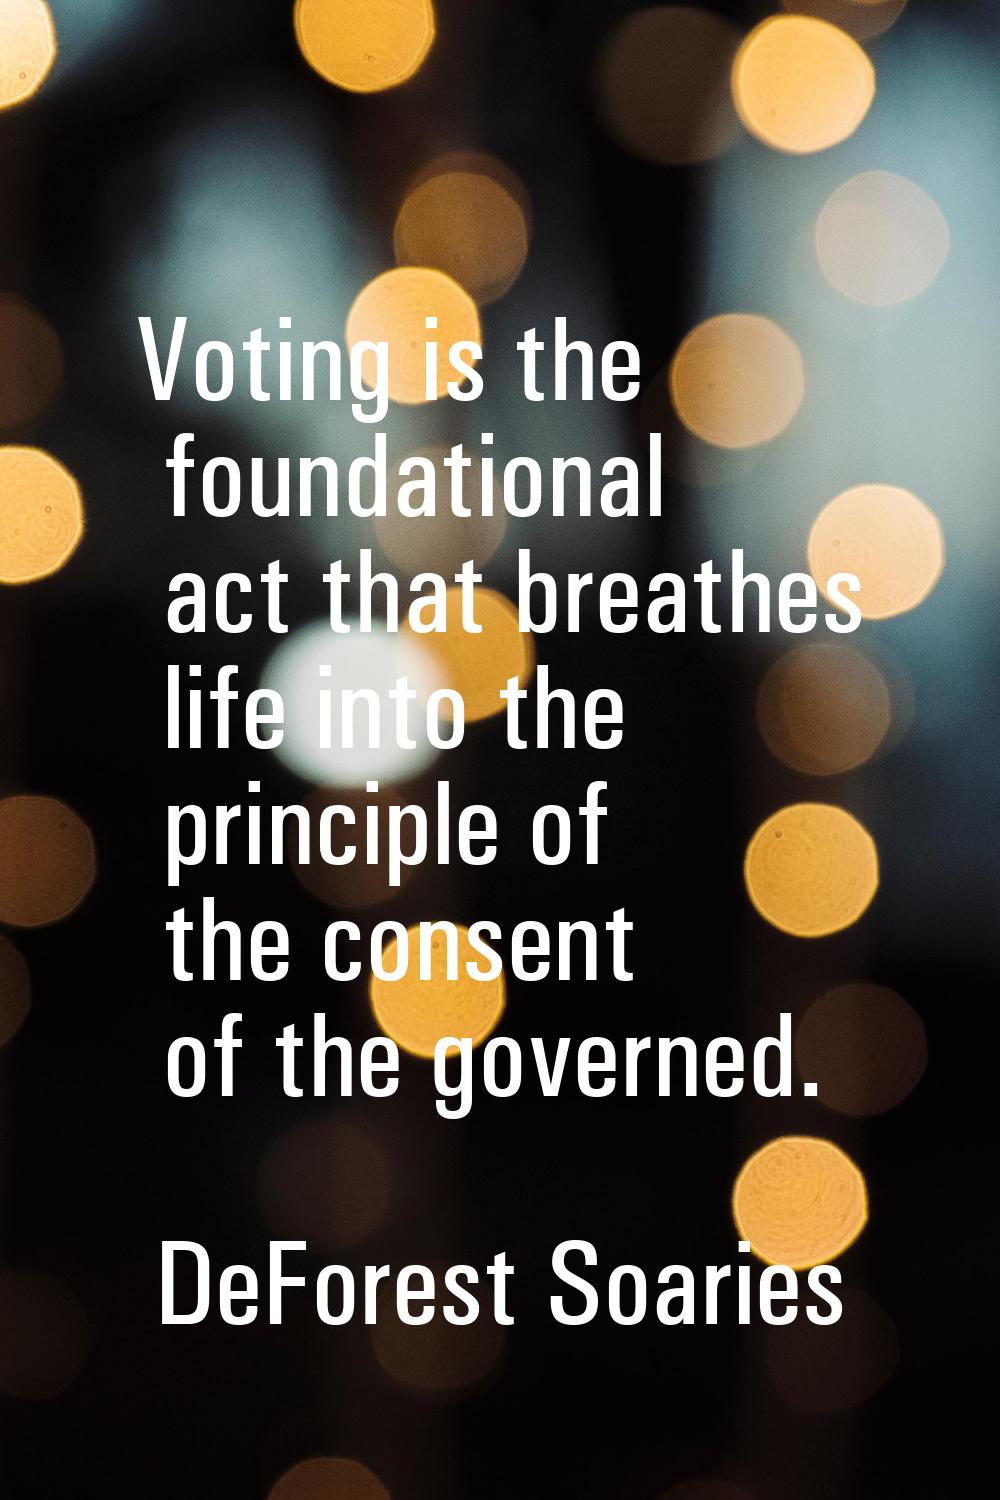 Voting is the foundational act that breathes life into the principle of the consent of the governed